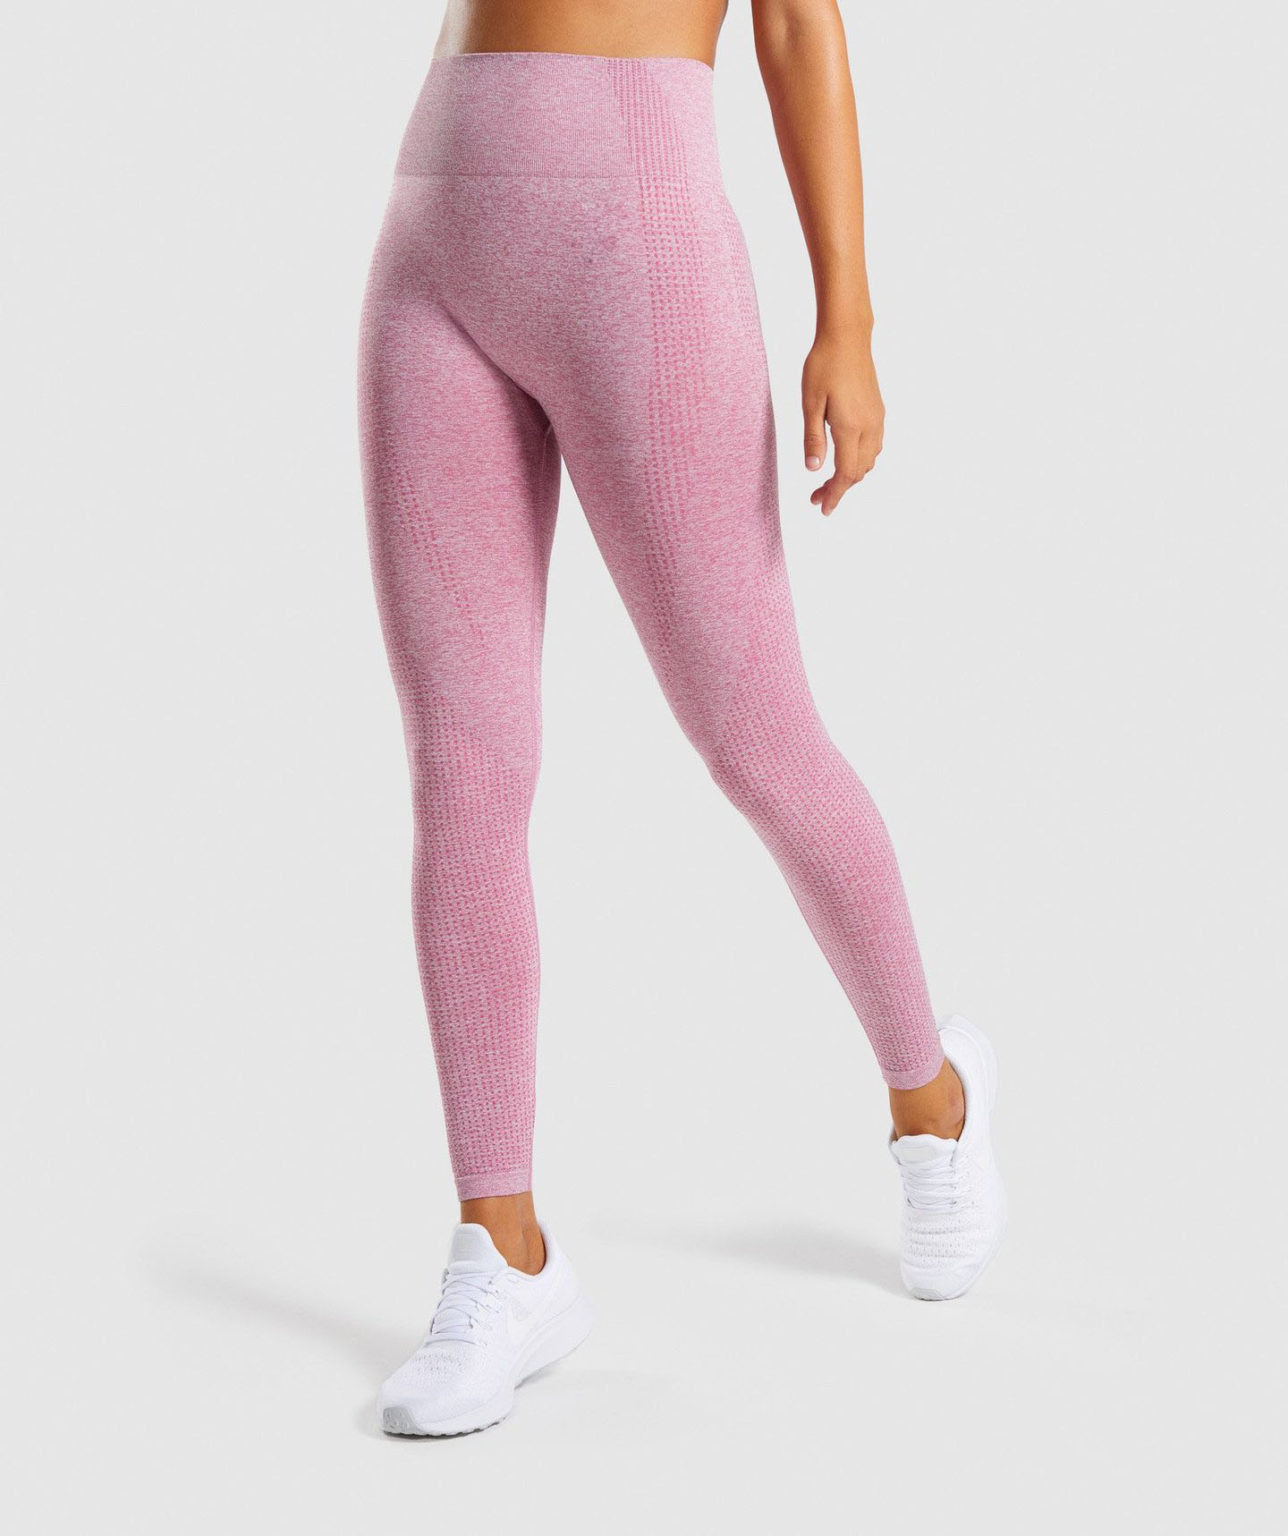 Leggings Wholesale Superstore Usajobs  International Society of Precision  Agriculture